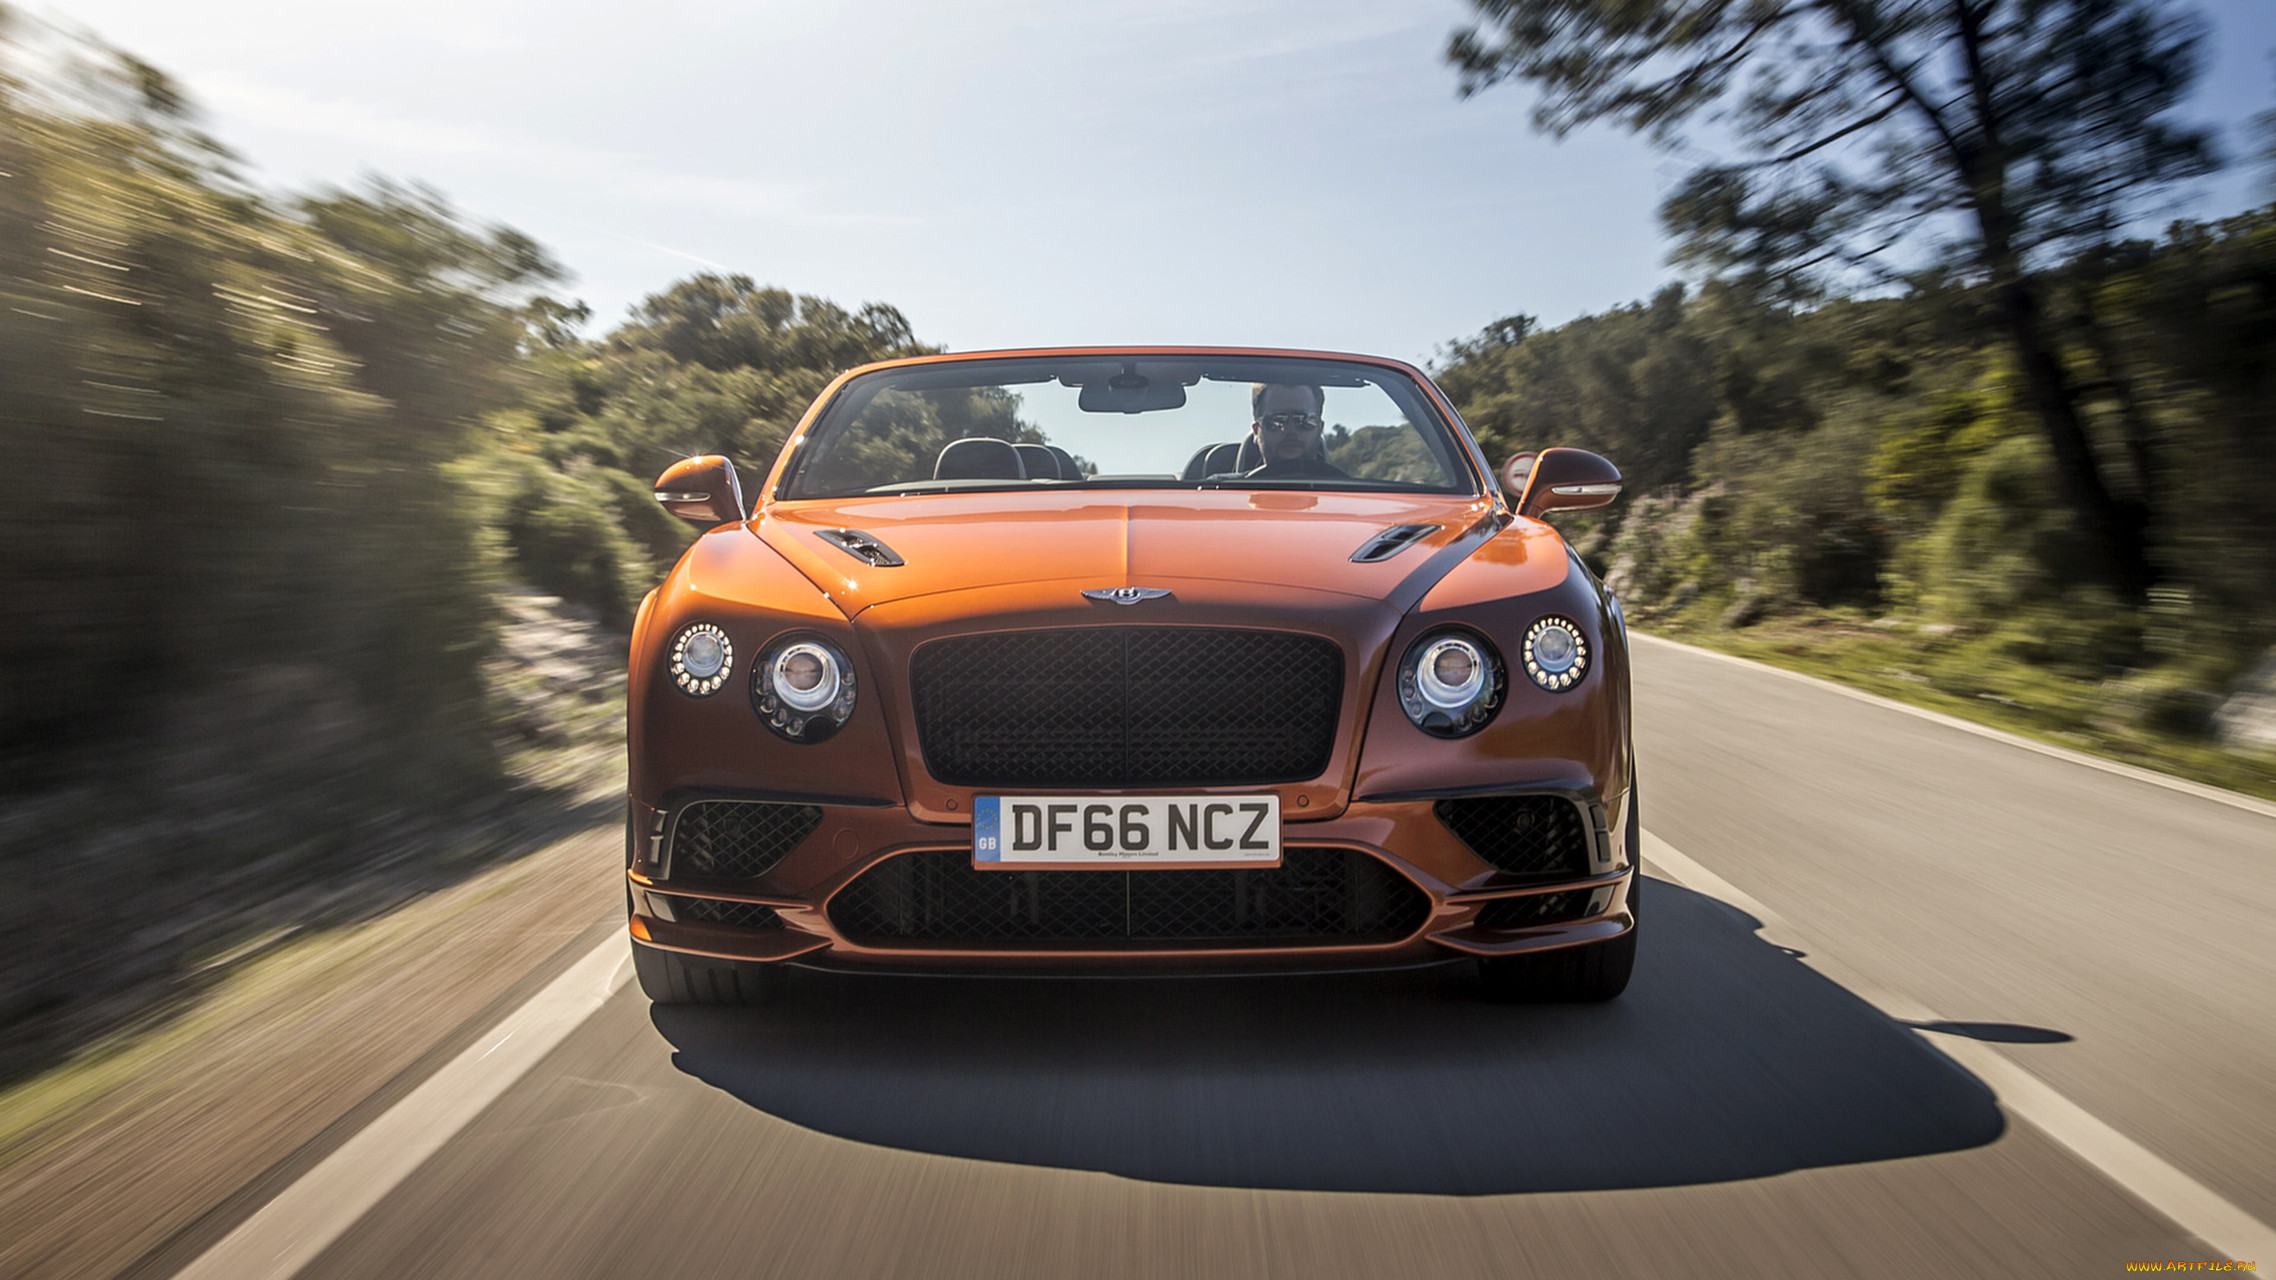 bentley continental gt supersports convertible 2018, , bentley, 2018, convertible, continental, supersports, gt